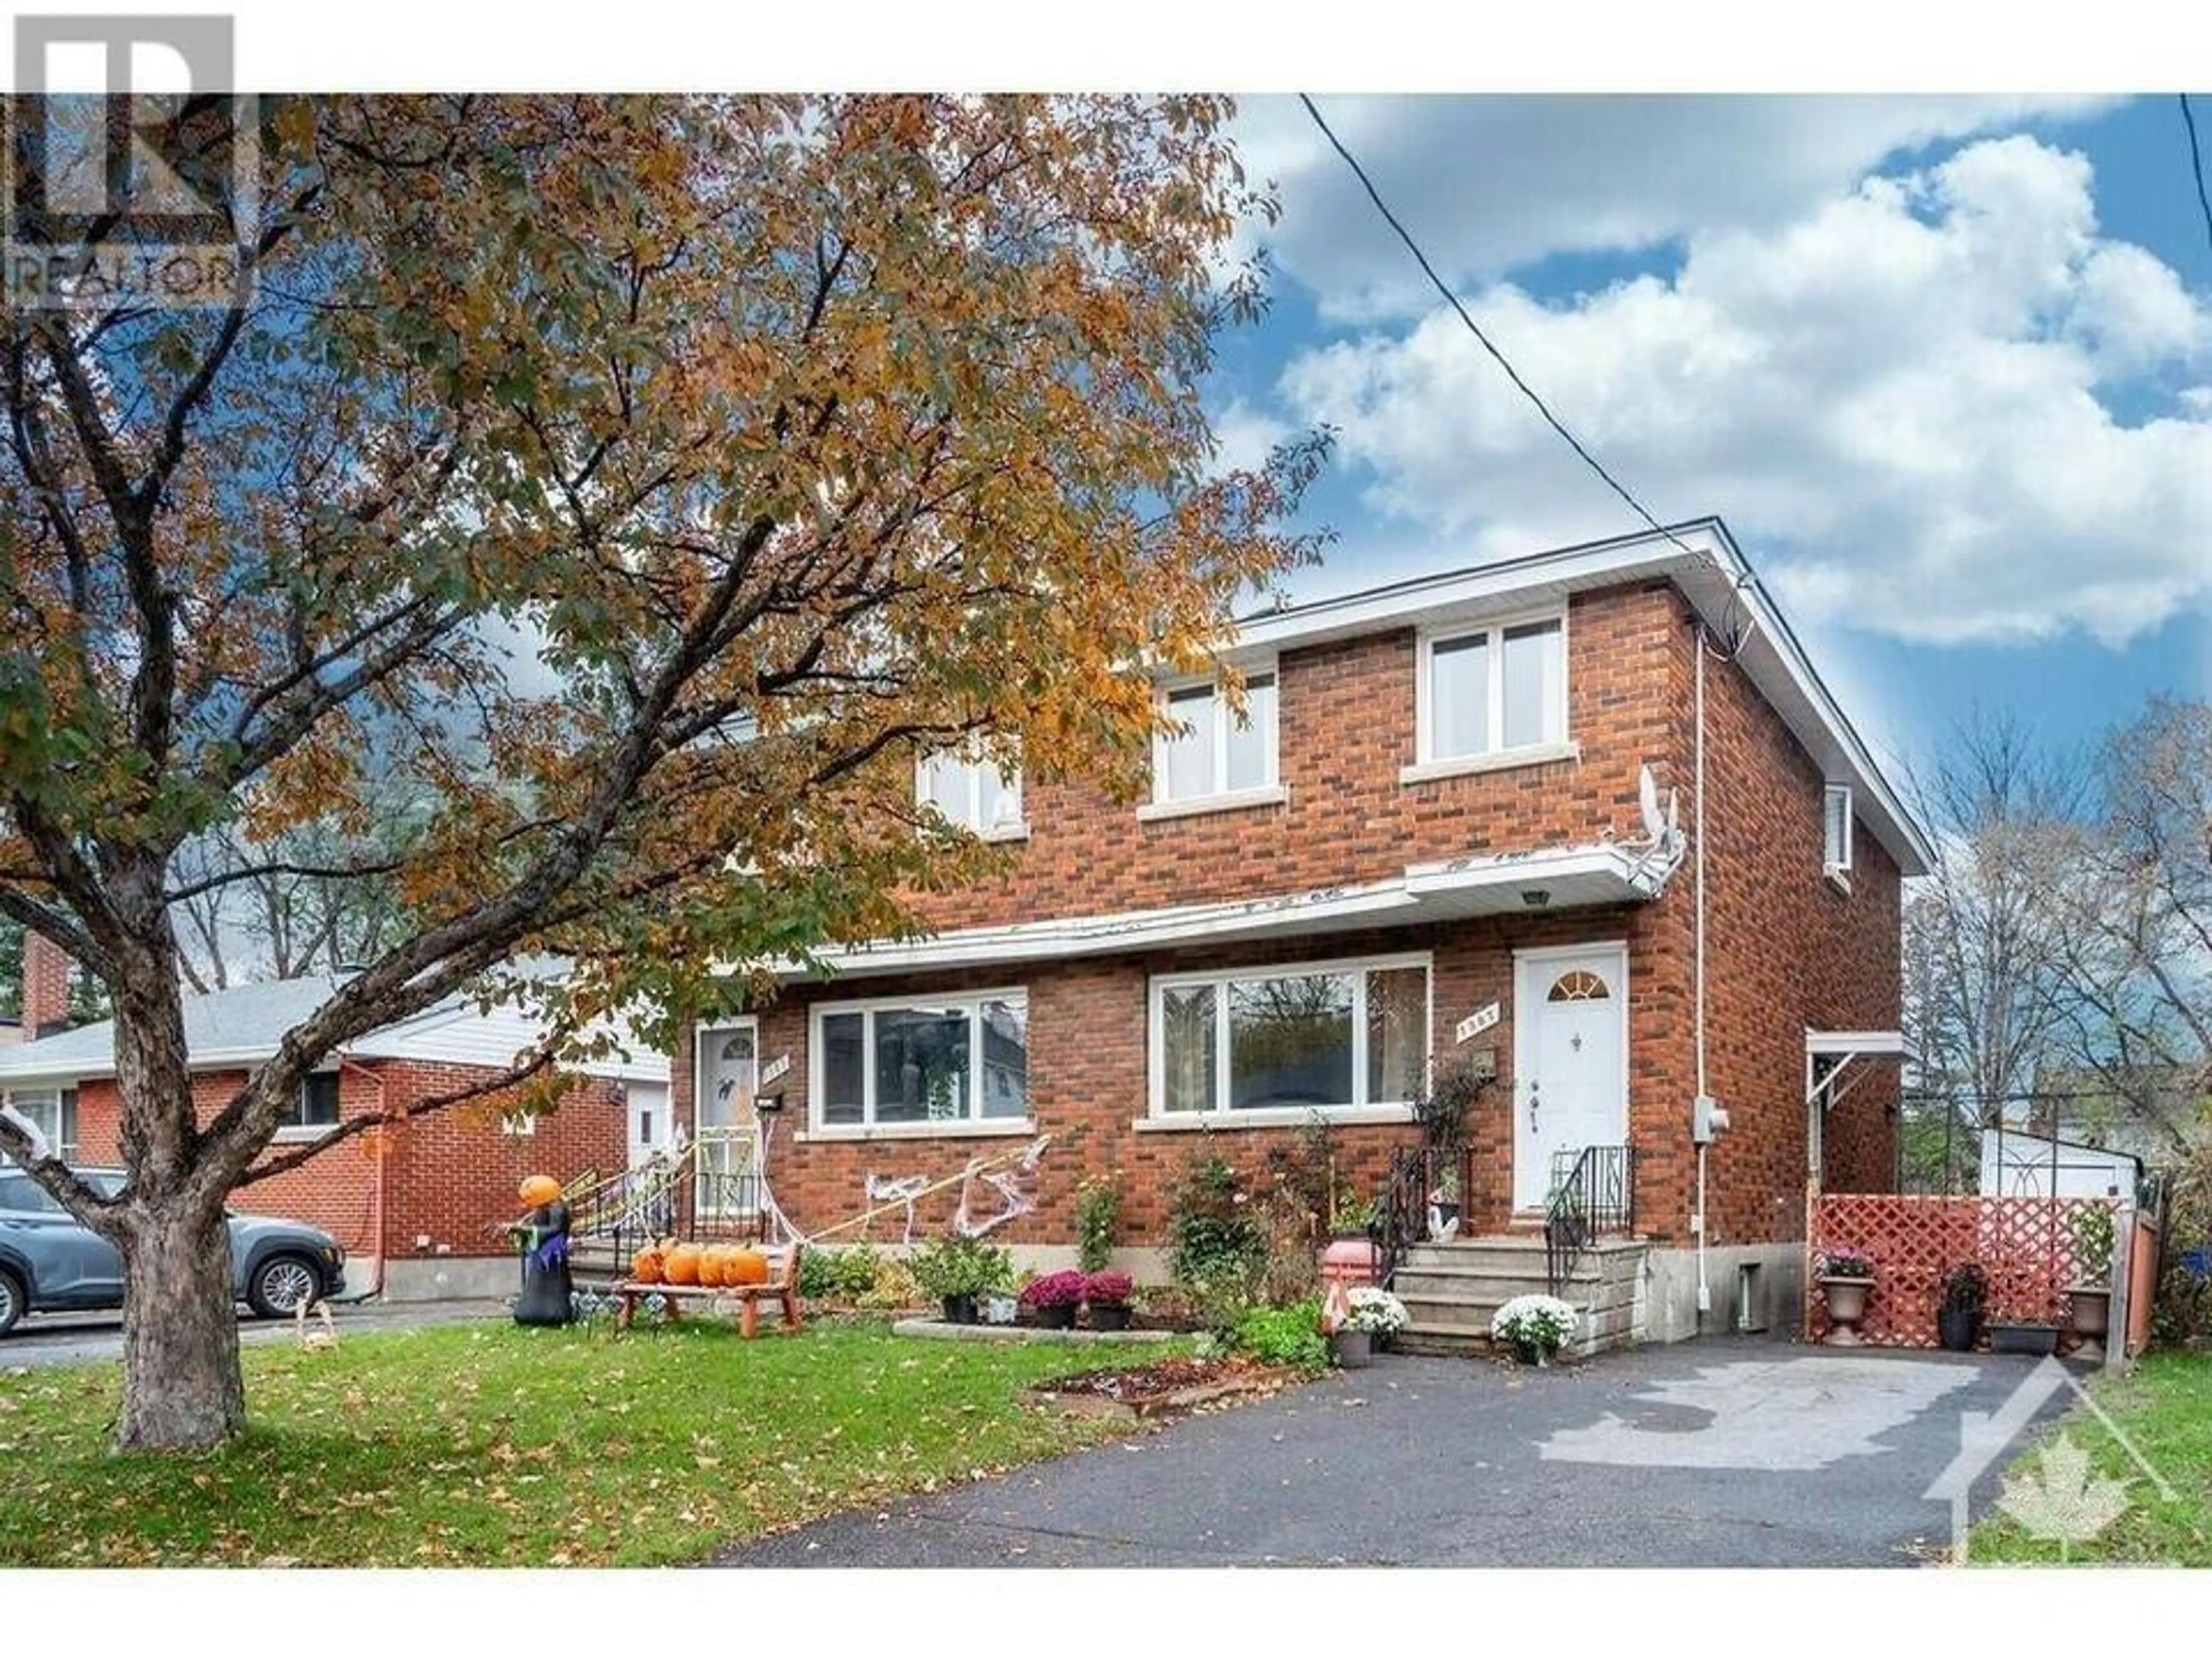 Home with brick exterior material for 1387-1389 RAVEN Ave, Ottawa Ontario K1Z 7Y5